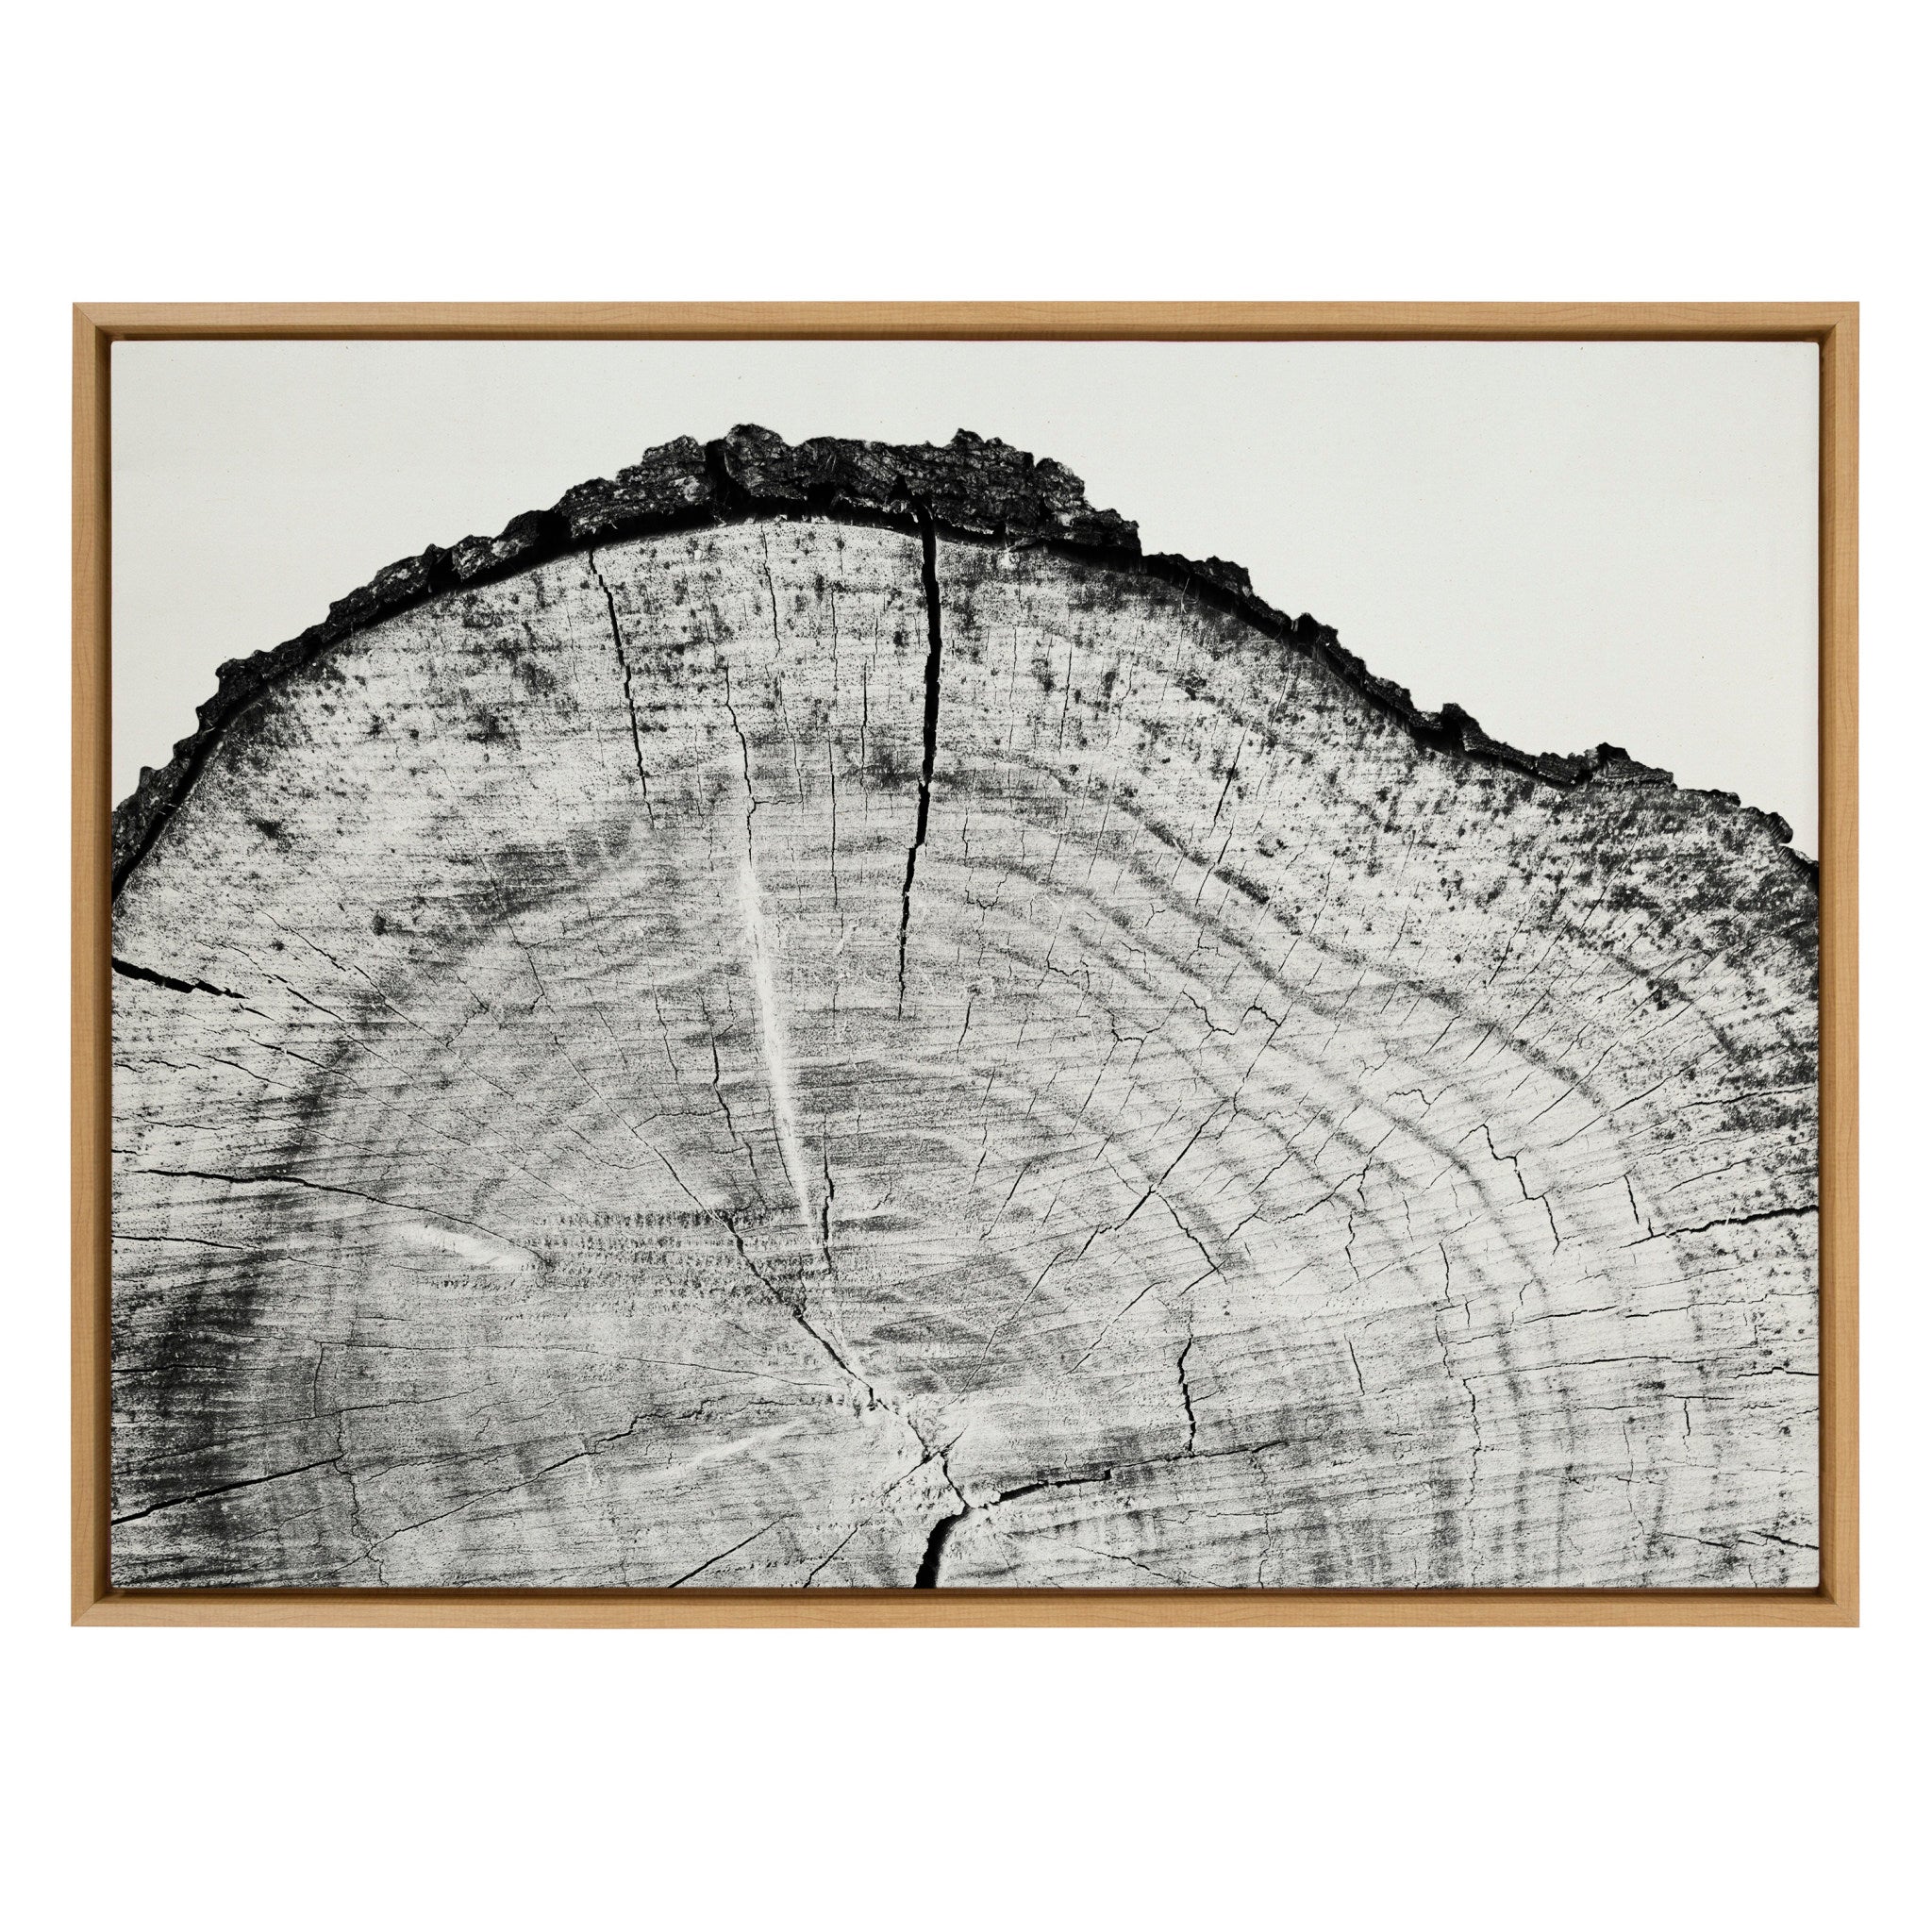 Sylvie Tree Rings BW Framed Canvas by Emiko and Mark Franzen of F2Images